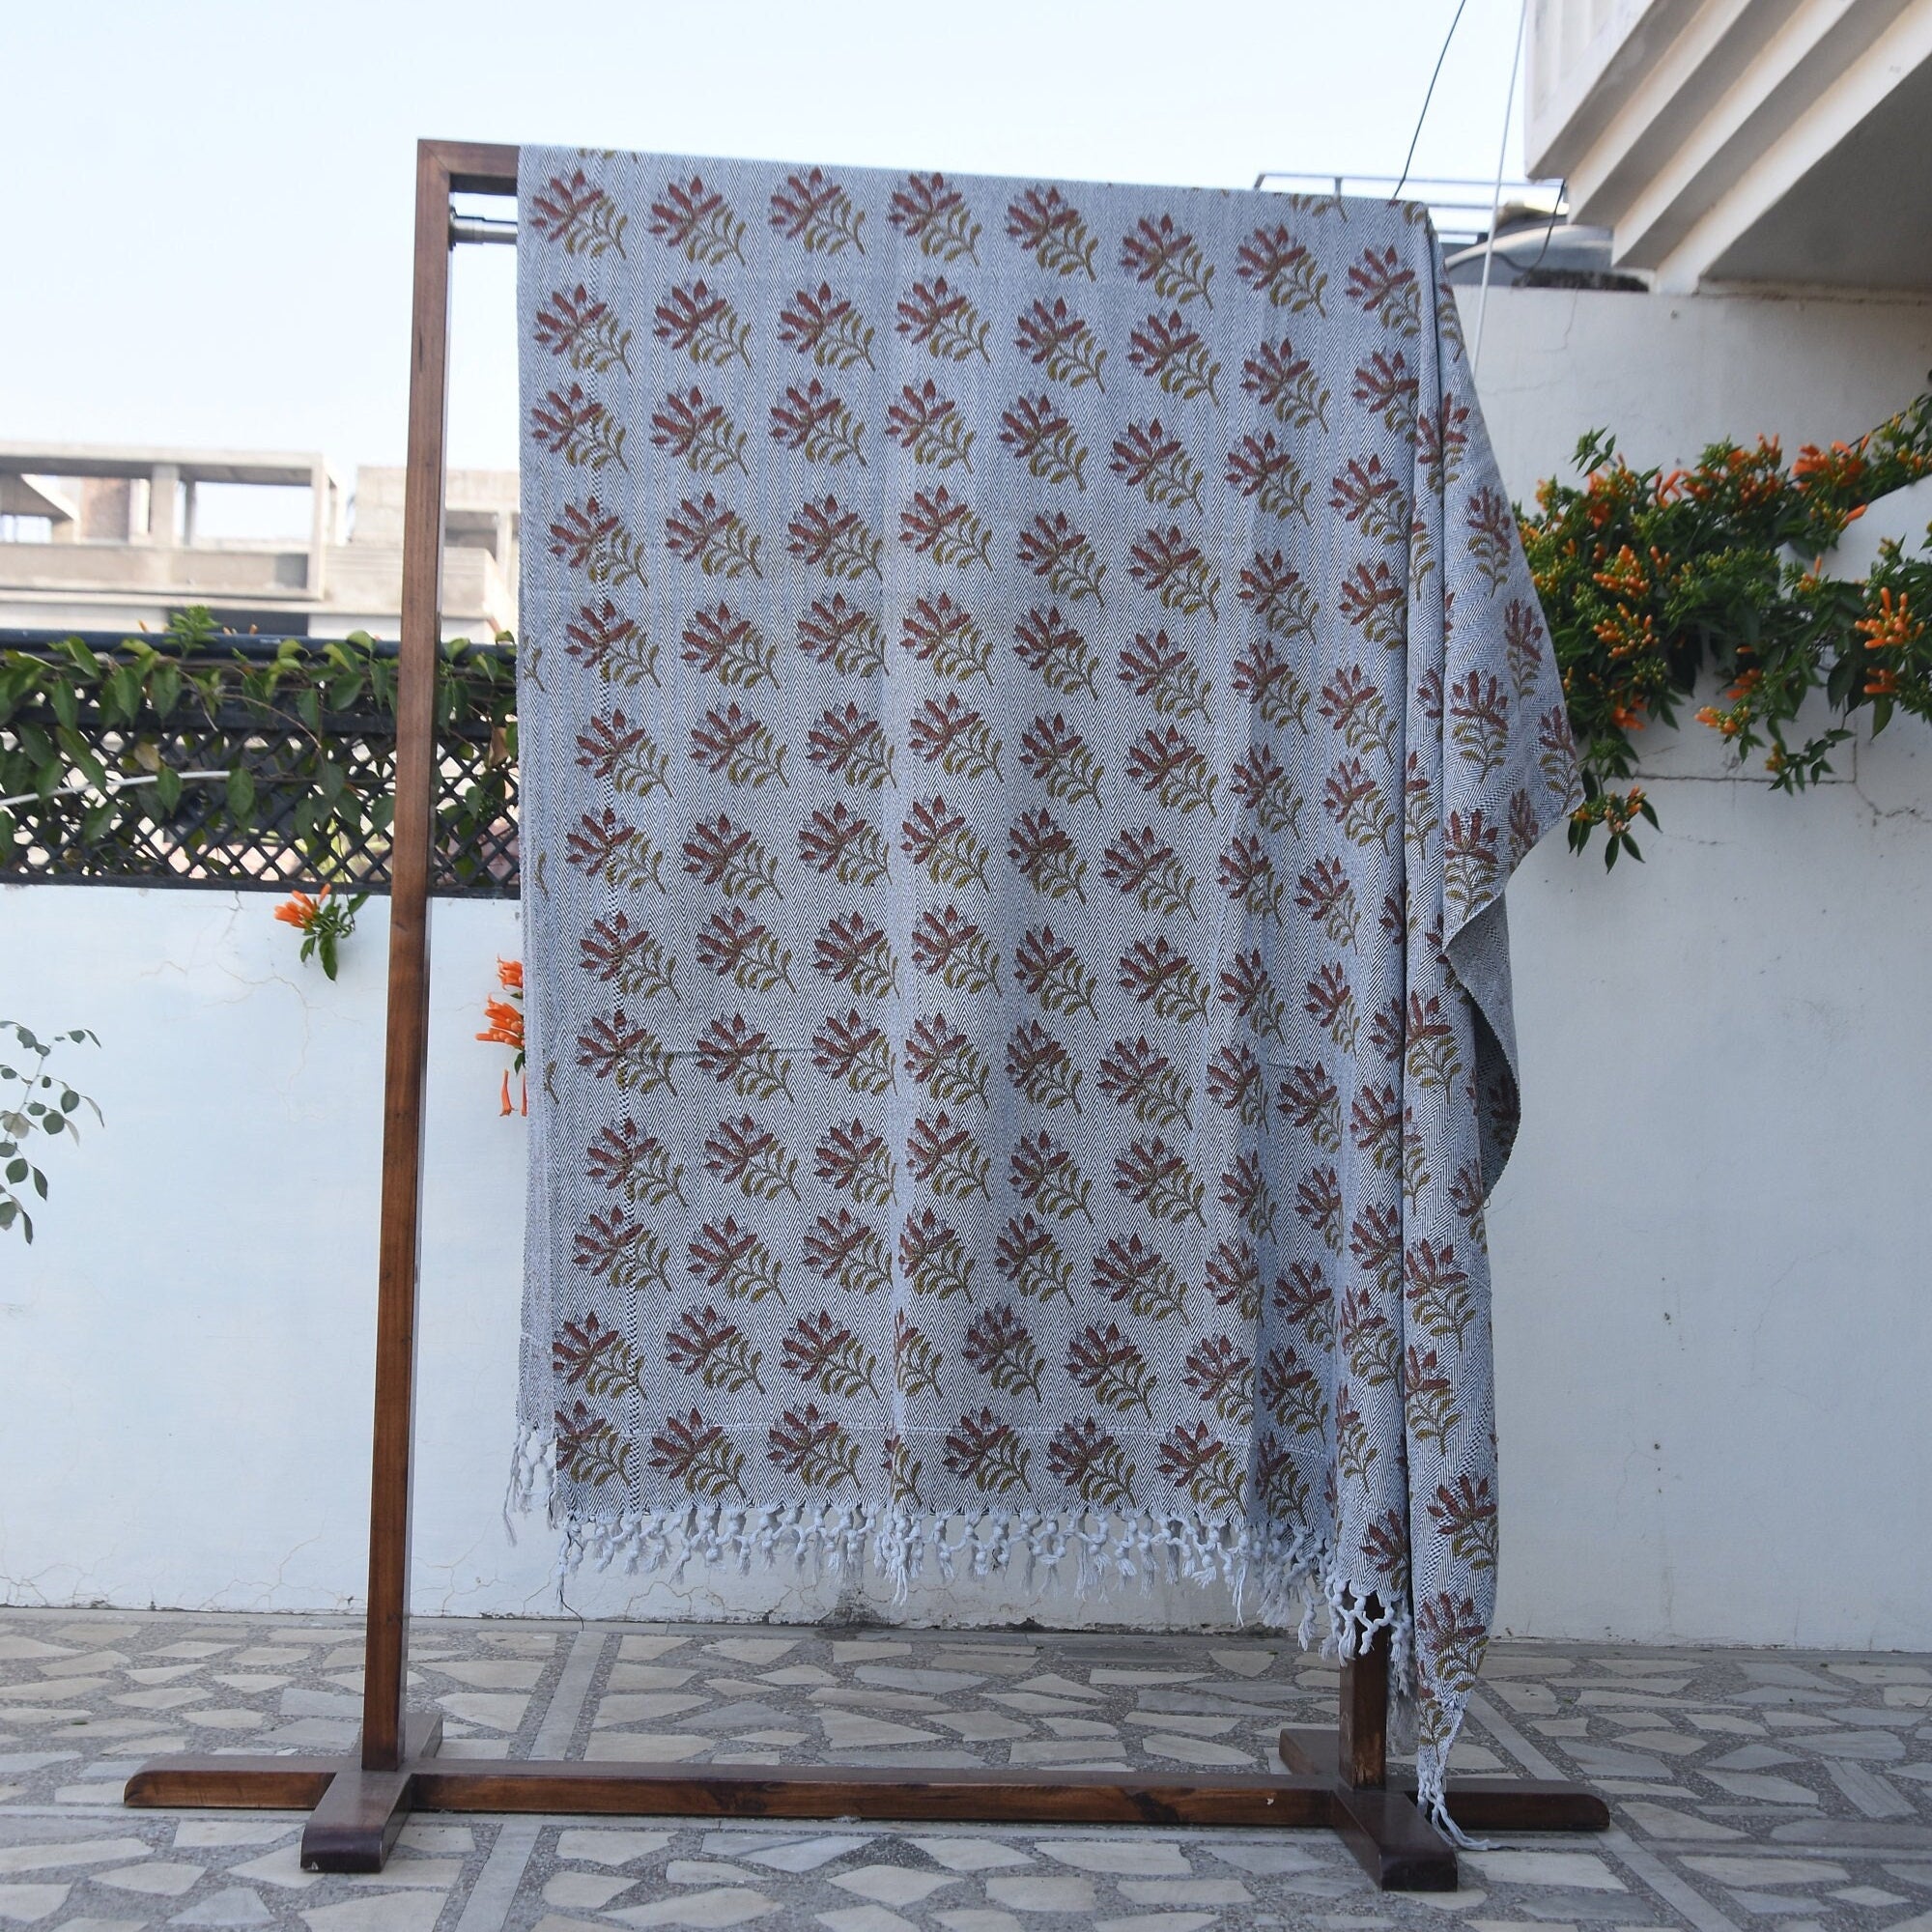 Handmade block print throw for beds, Handwoven throws, handloom fabric, blankets and throws for Sofa - SUMMER FLOWER